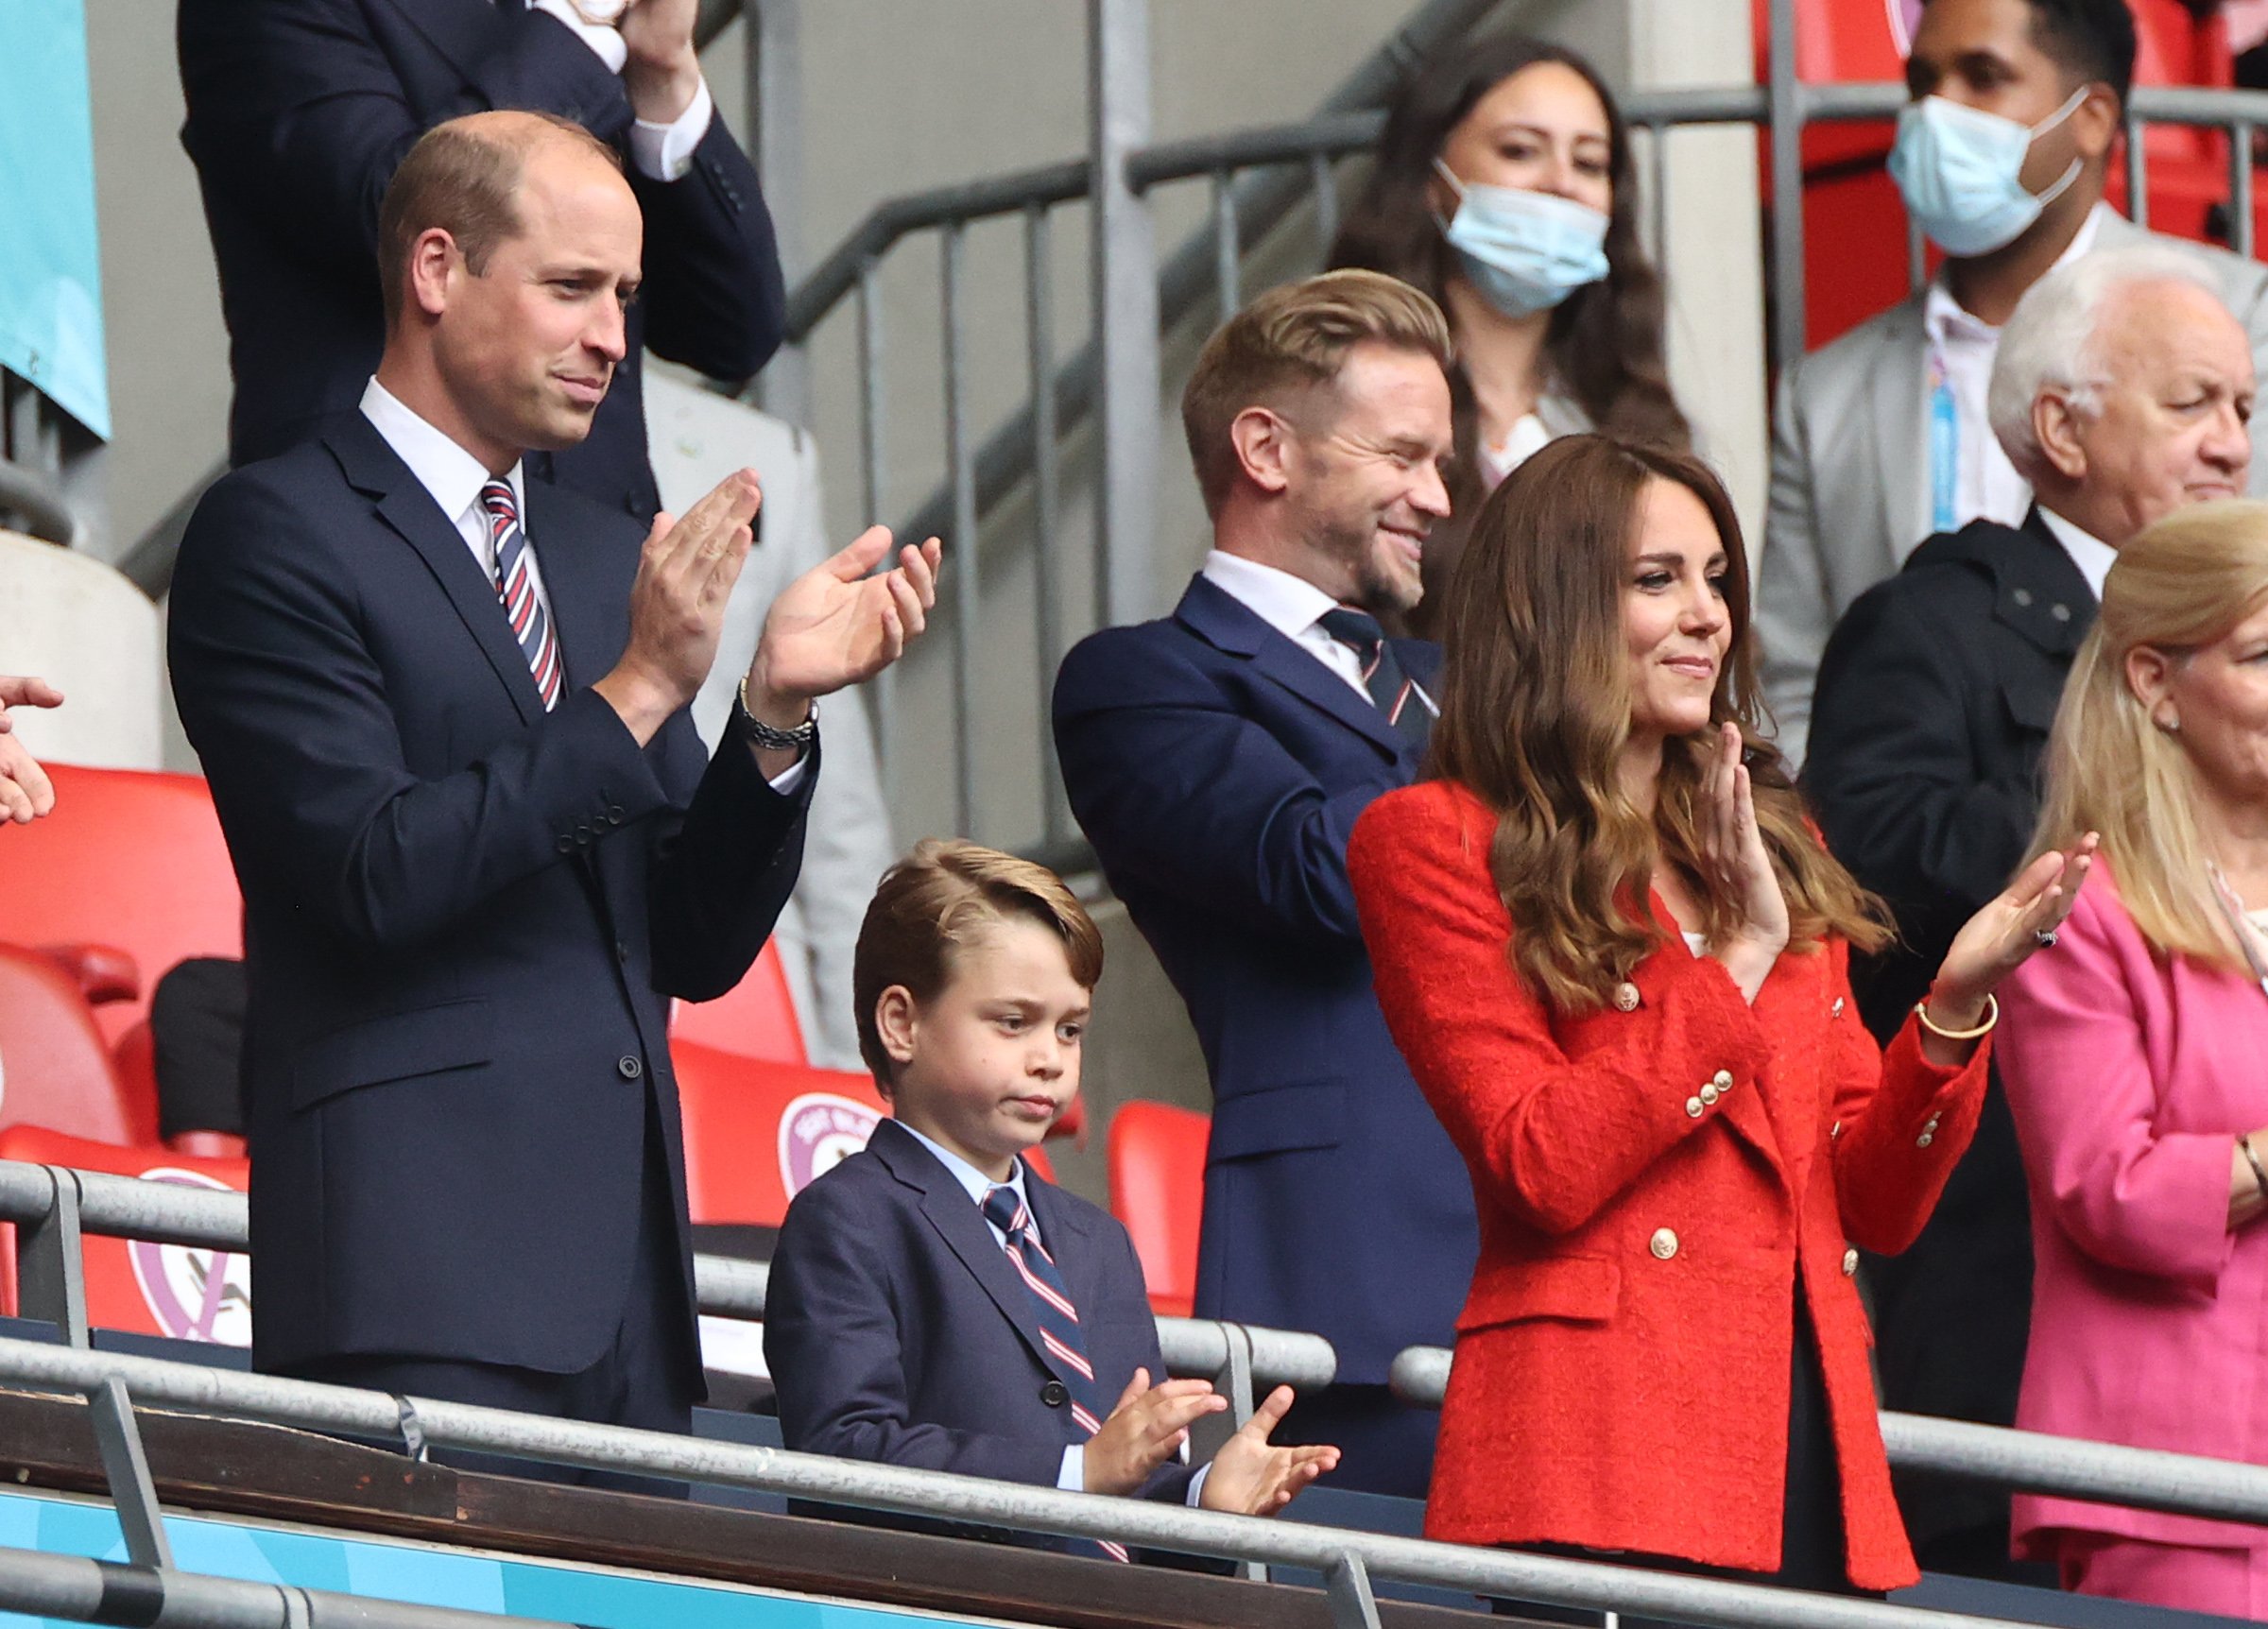 The British Prince William, Duke of Cambridge stands with his wife Kate, Duchess of Cambridge, and their son Prince George in the stands. | Source: Getty Images